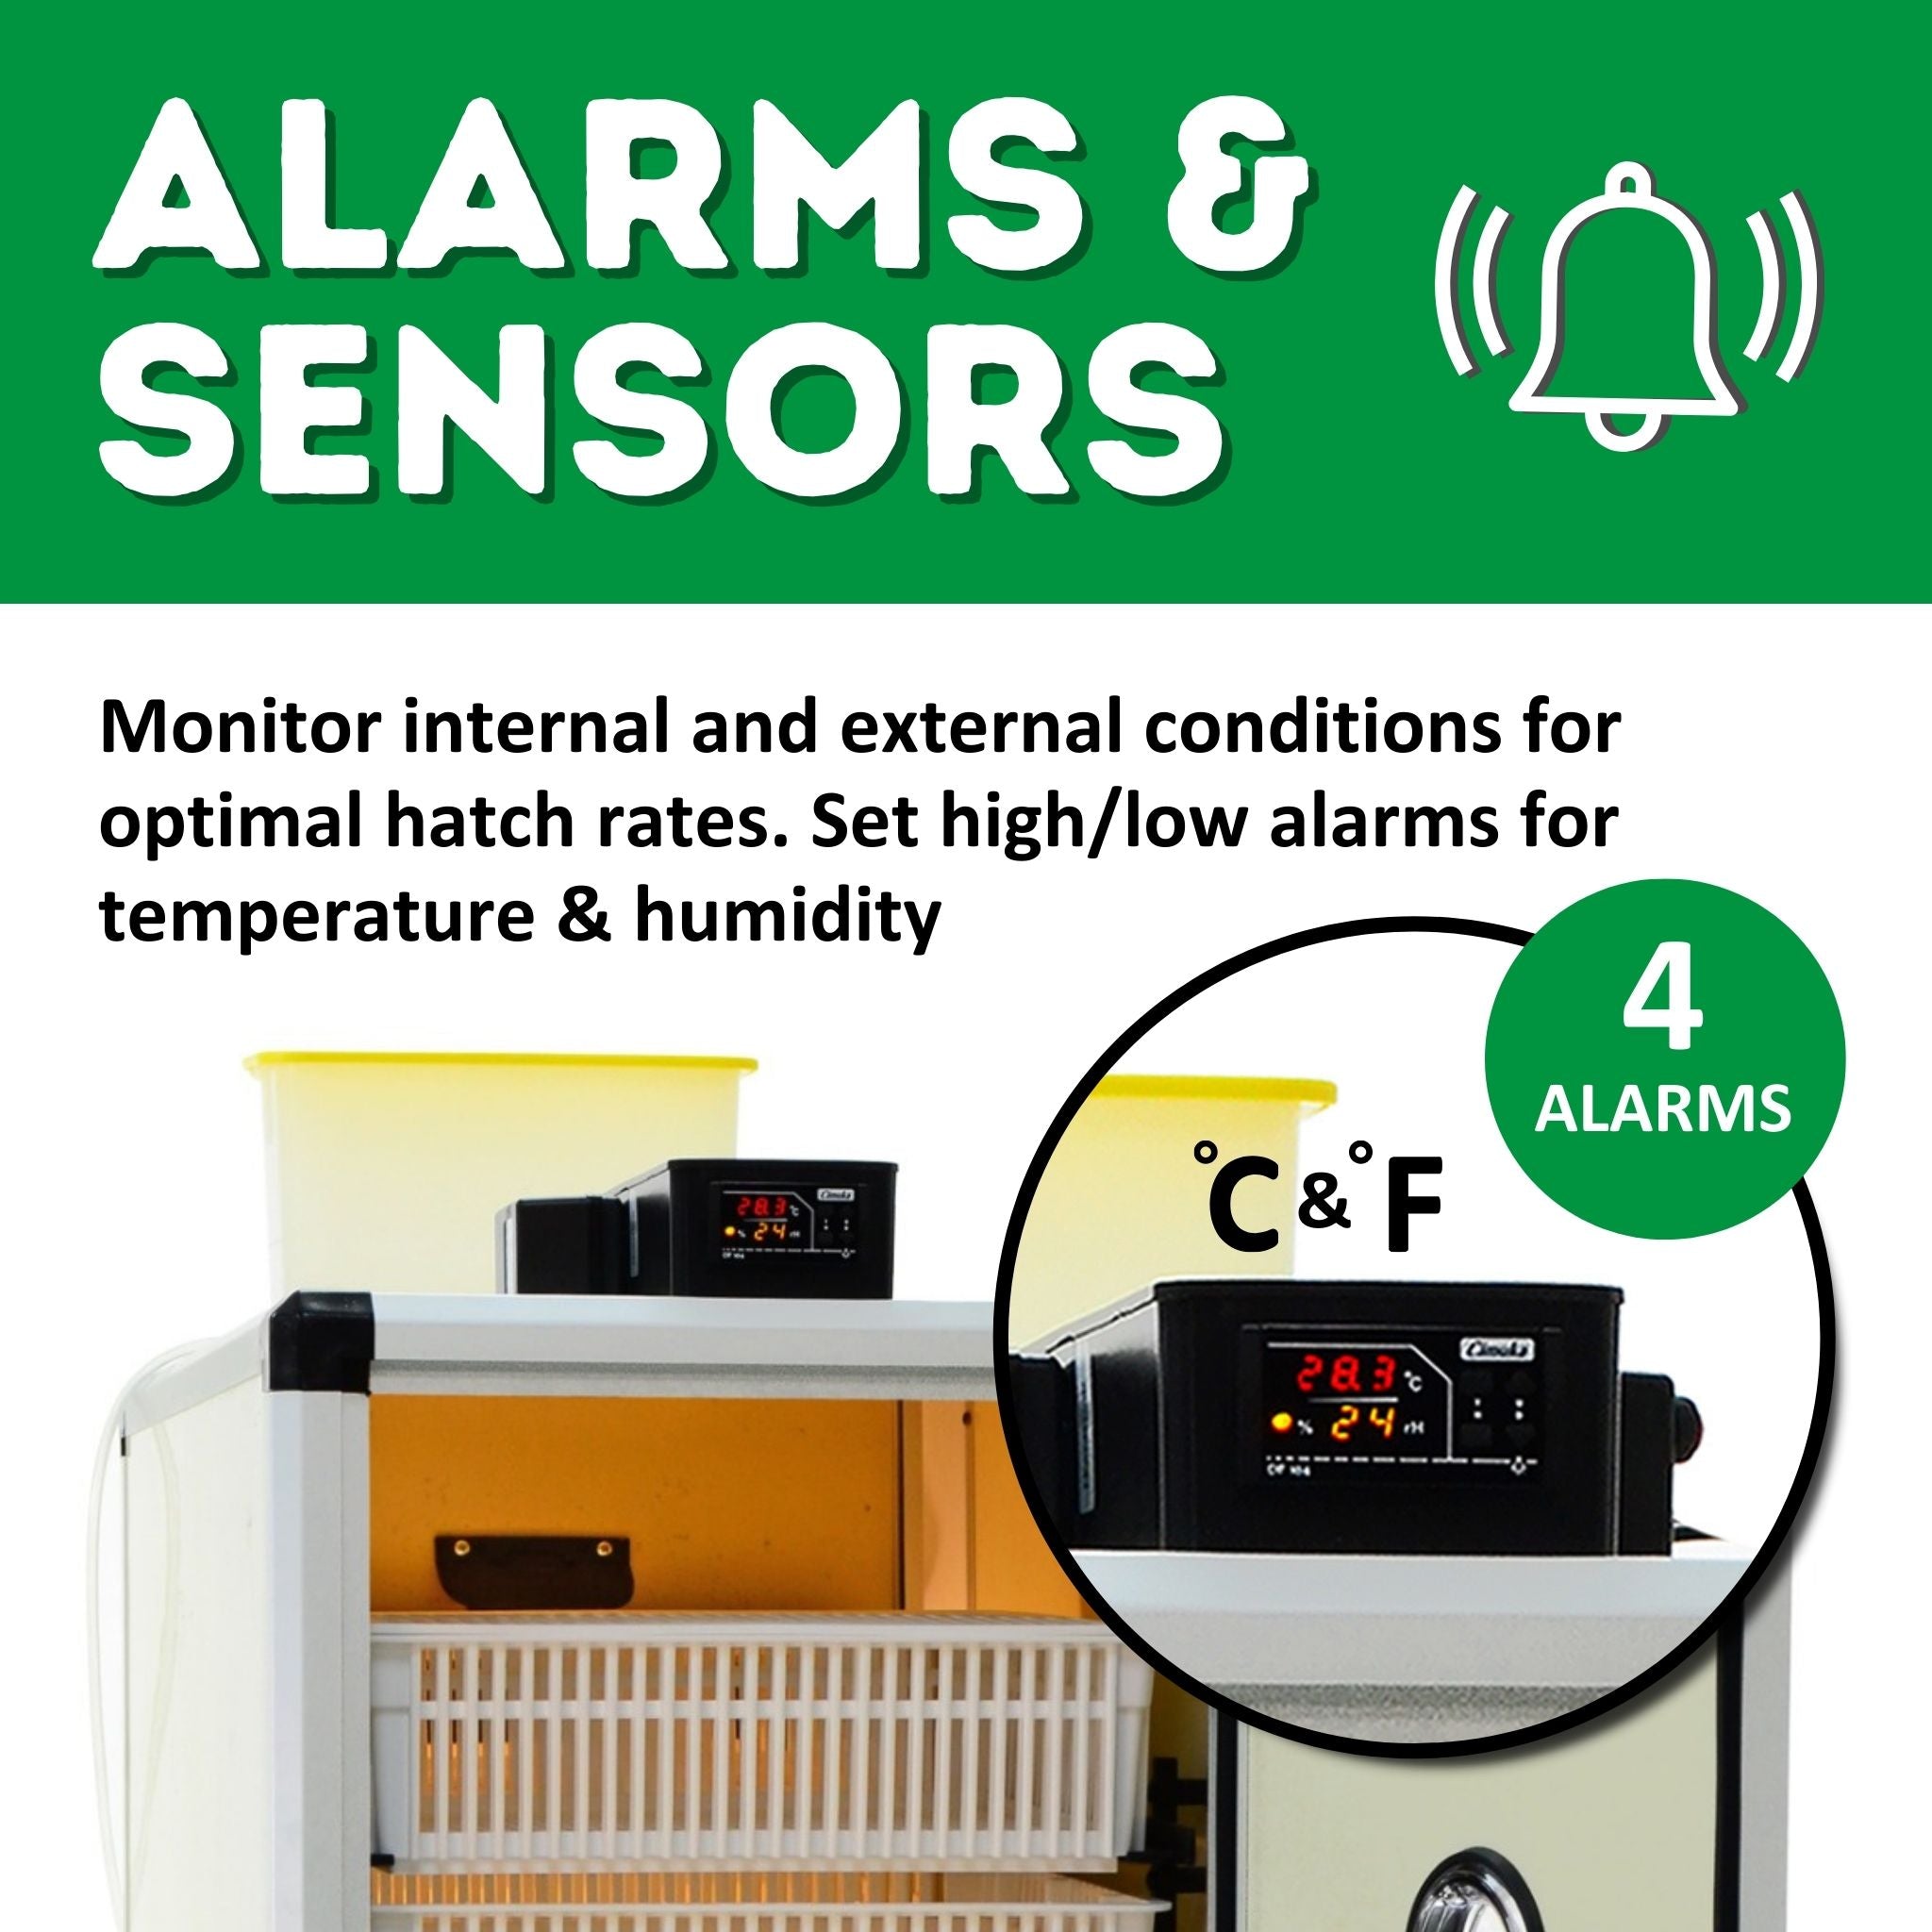 Hatching Time Cimuka. Image shows a focus on digital controls that have alarms and sensors for temperature and humidity.